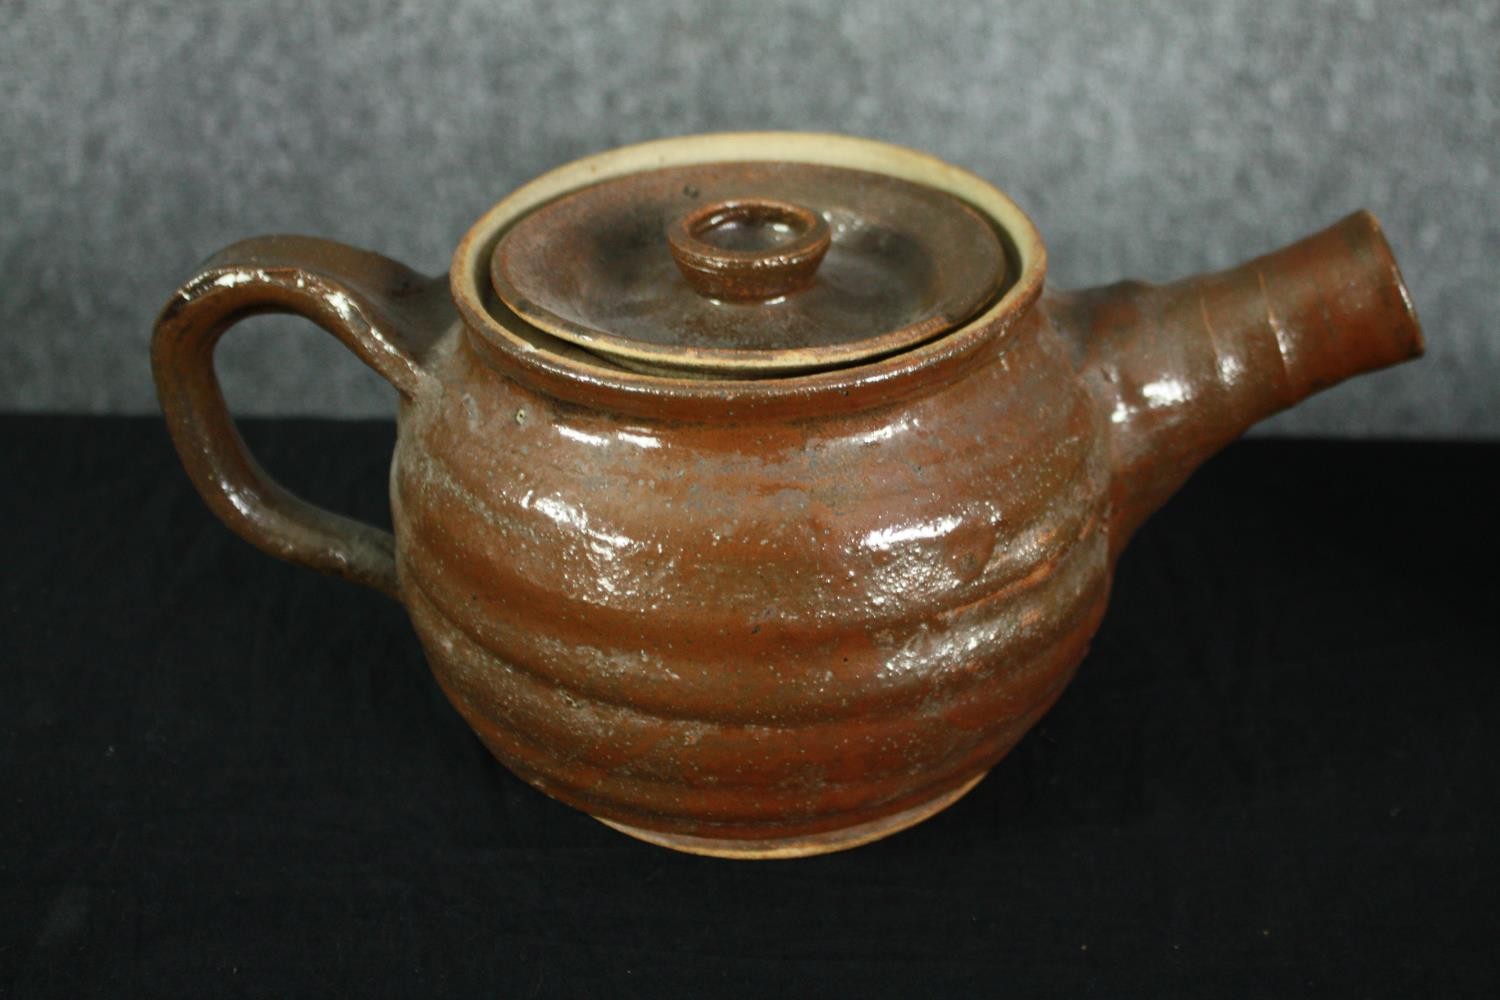 A mixed collection of pottery including a teapot with a flared spout, a jug, and three vases. The - Image 2 of 11